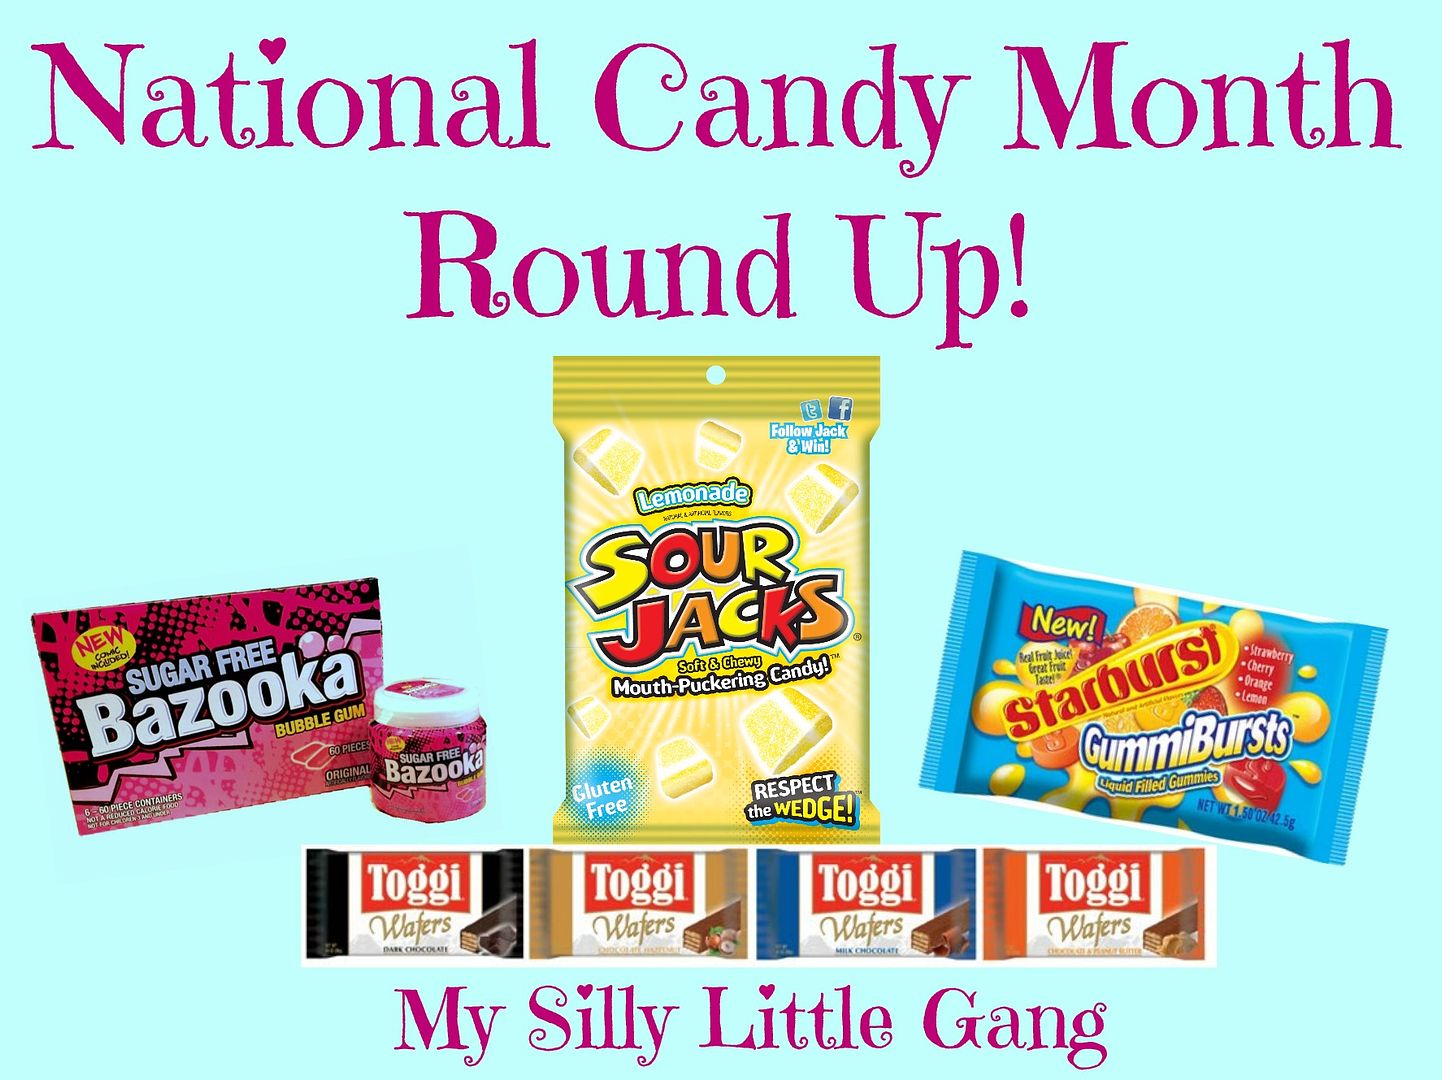 National Candy Month Round Up